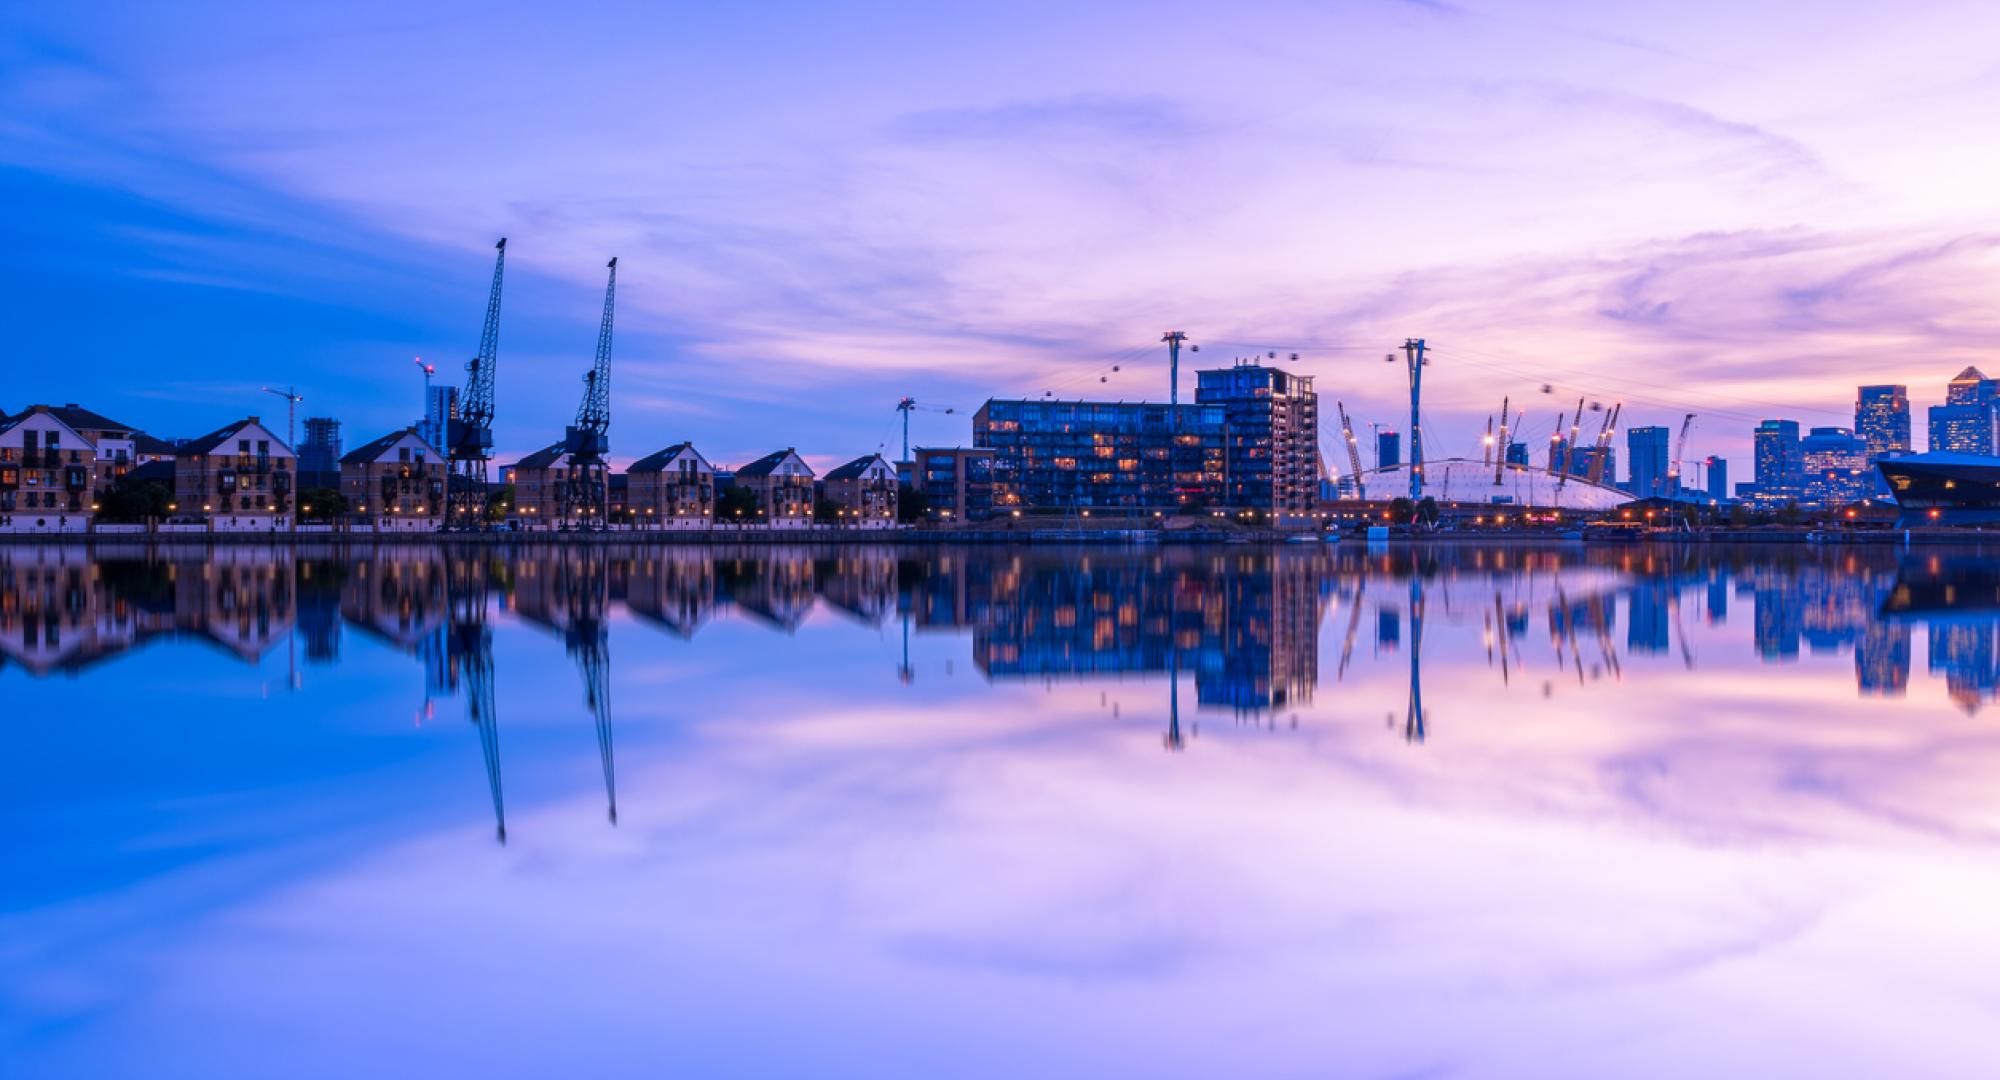 Dusk view of Royal Victoria Dock, with Canary Wharf in the background